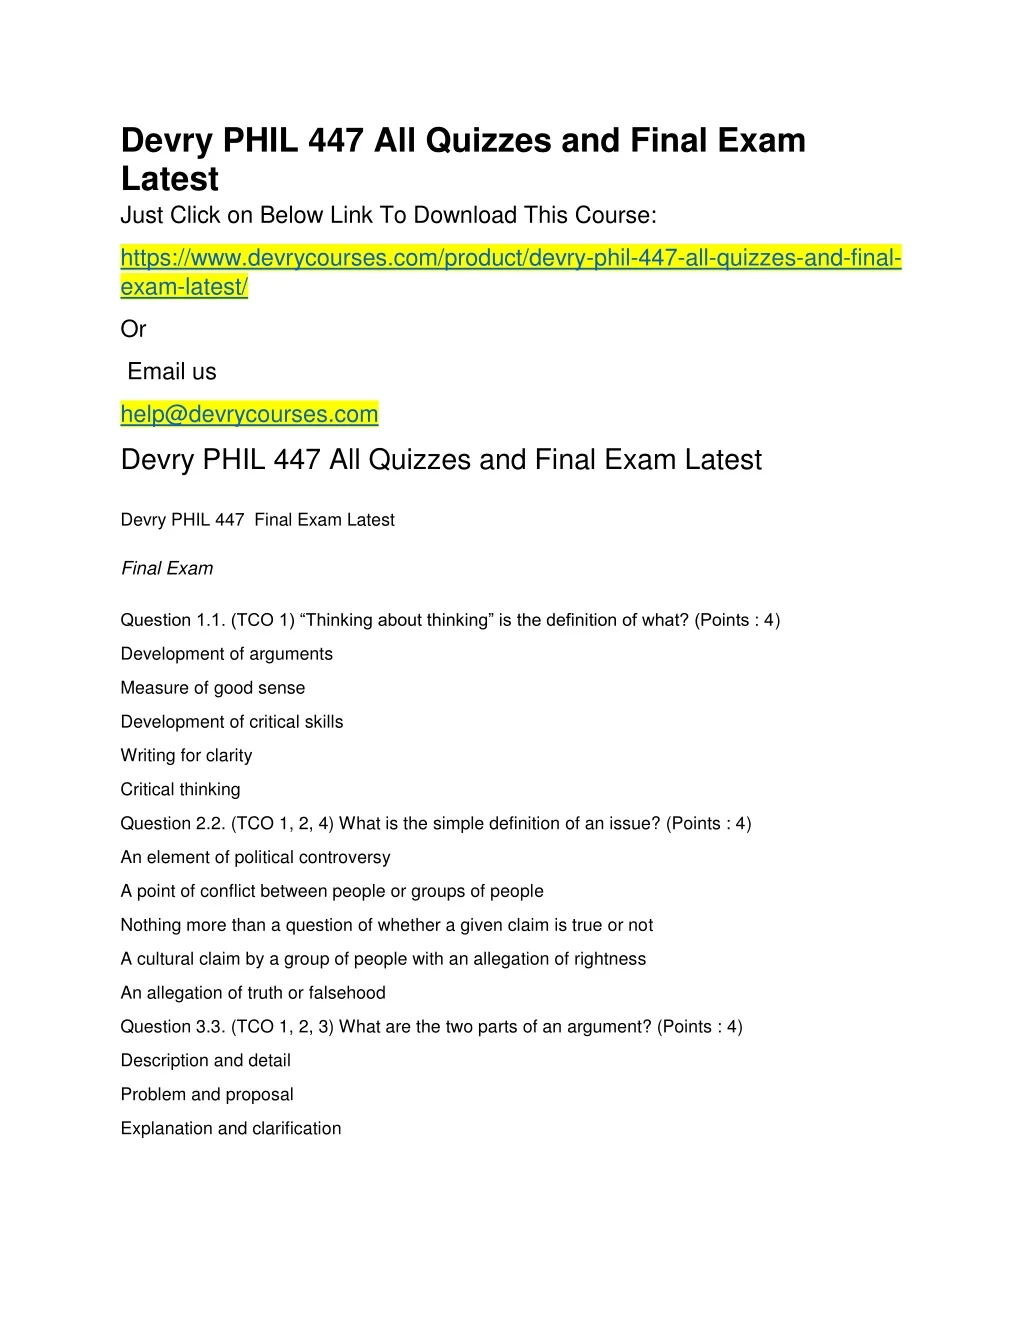 devry phil 447 all quizzes and final exam latest